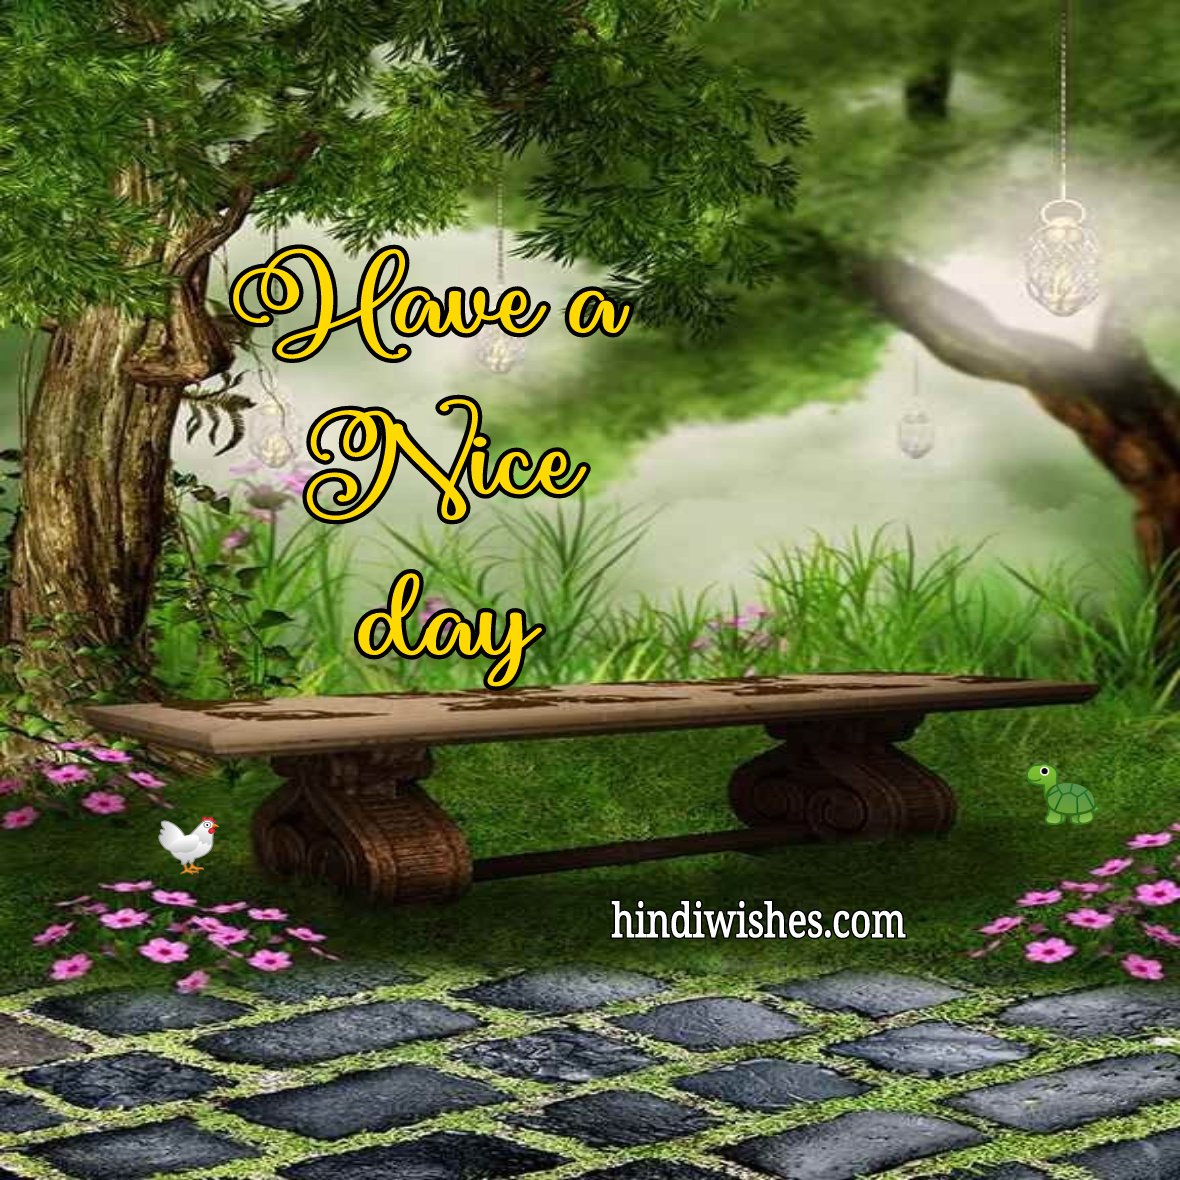 Have a Nice Day Images in Full HD